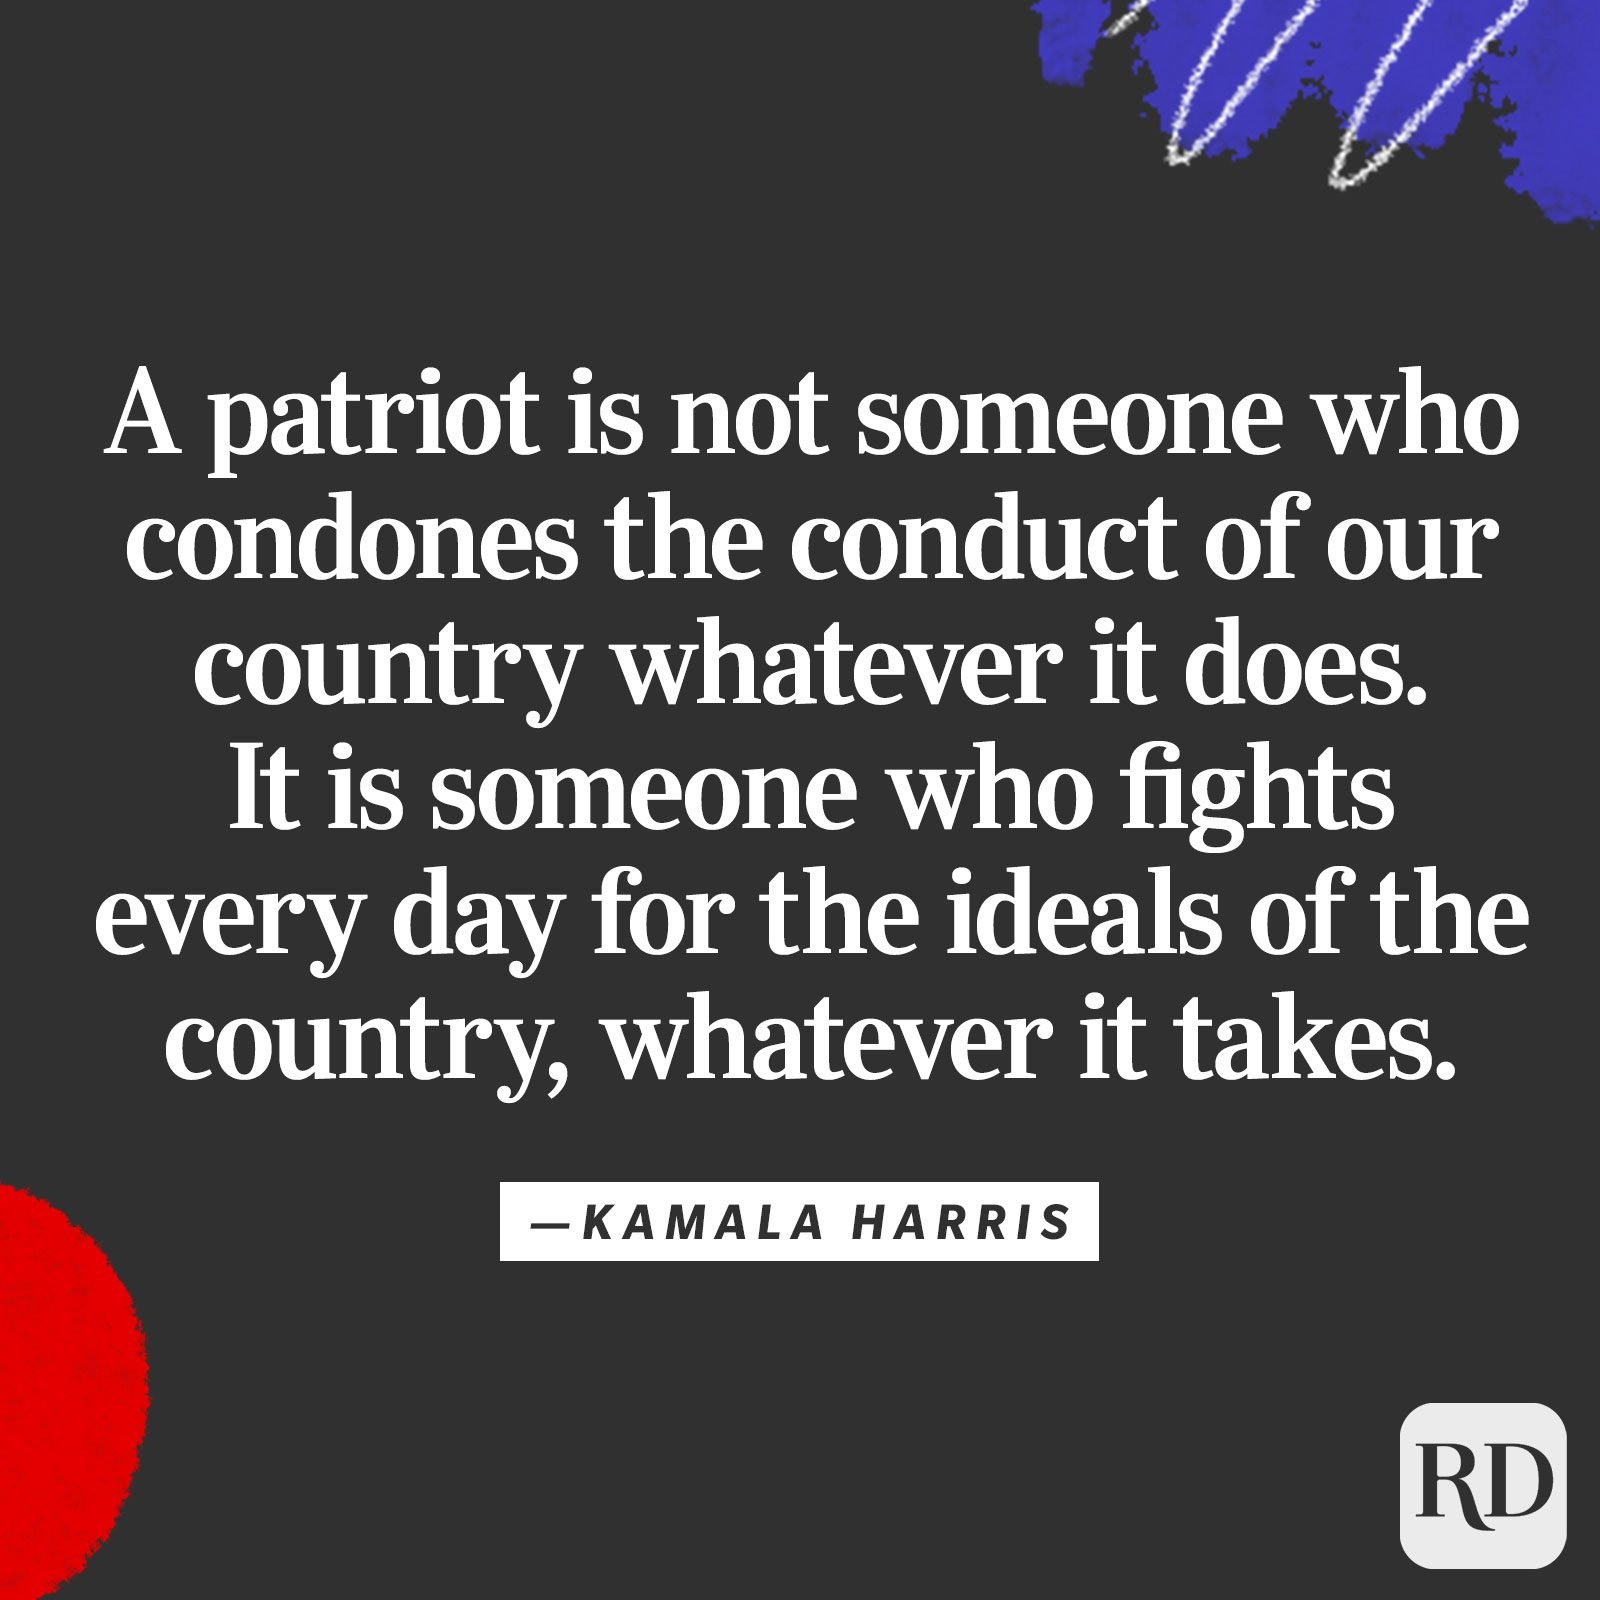 "A patriot is not someone who condones the conduct of our country whatever it does. It is someone who fights every day for the ideals of the country, whatever it takes."